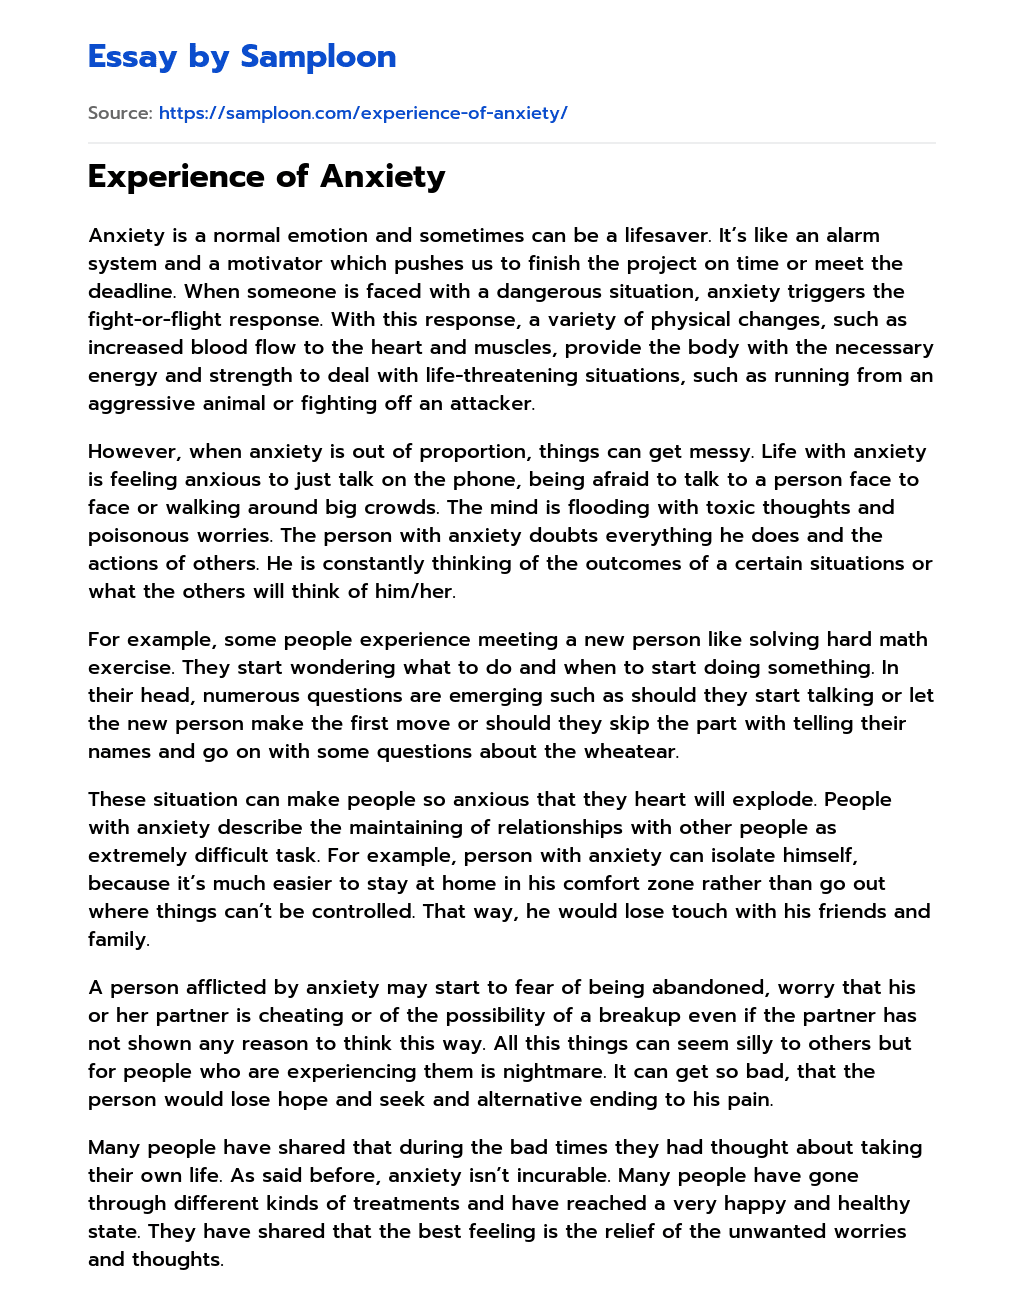 Experience of Anxiety essay